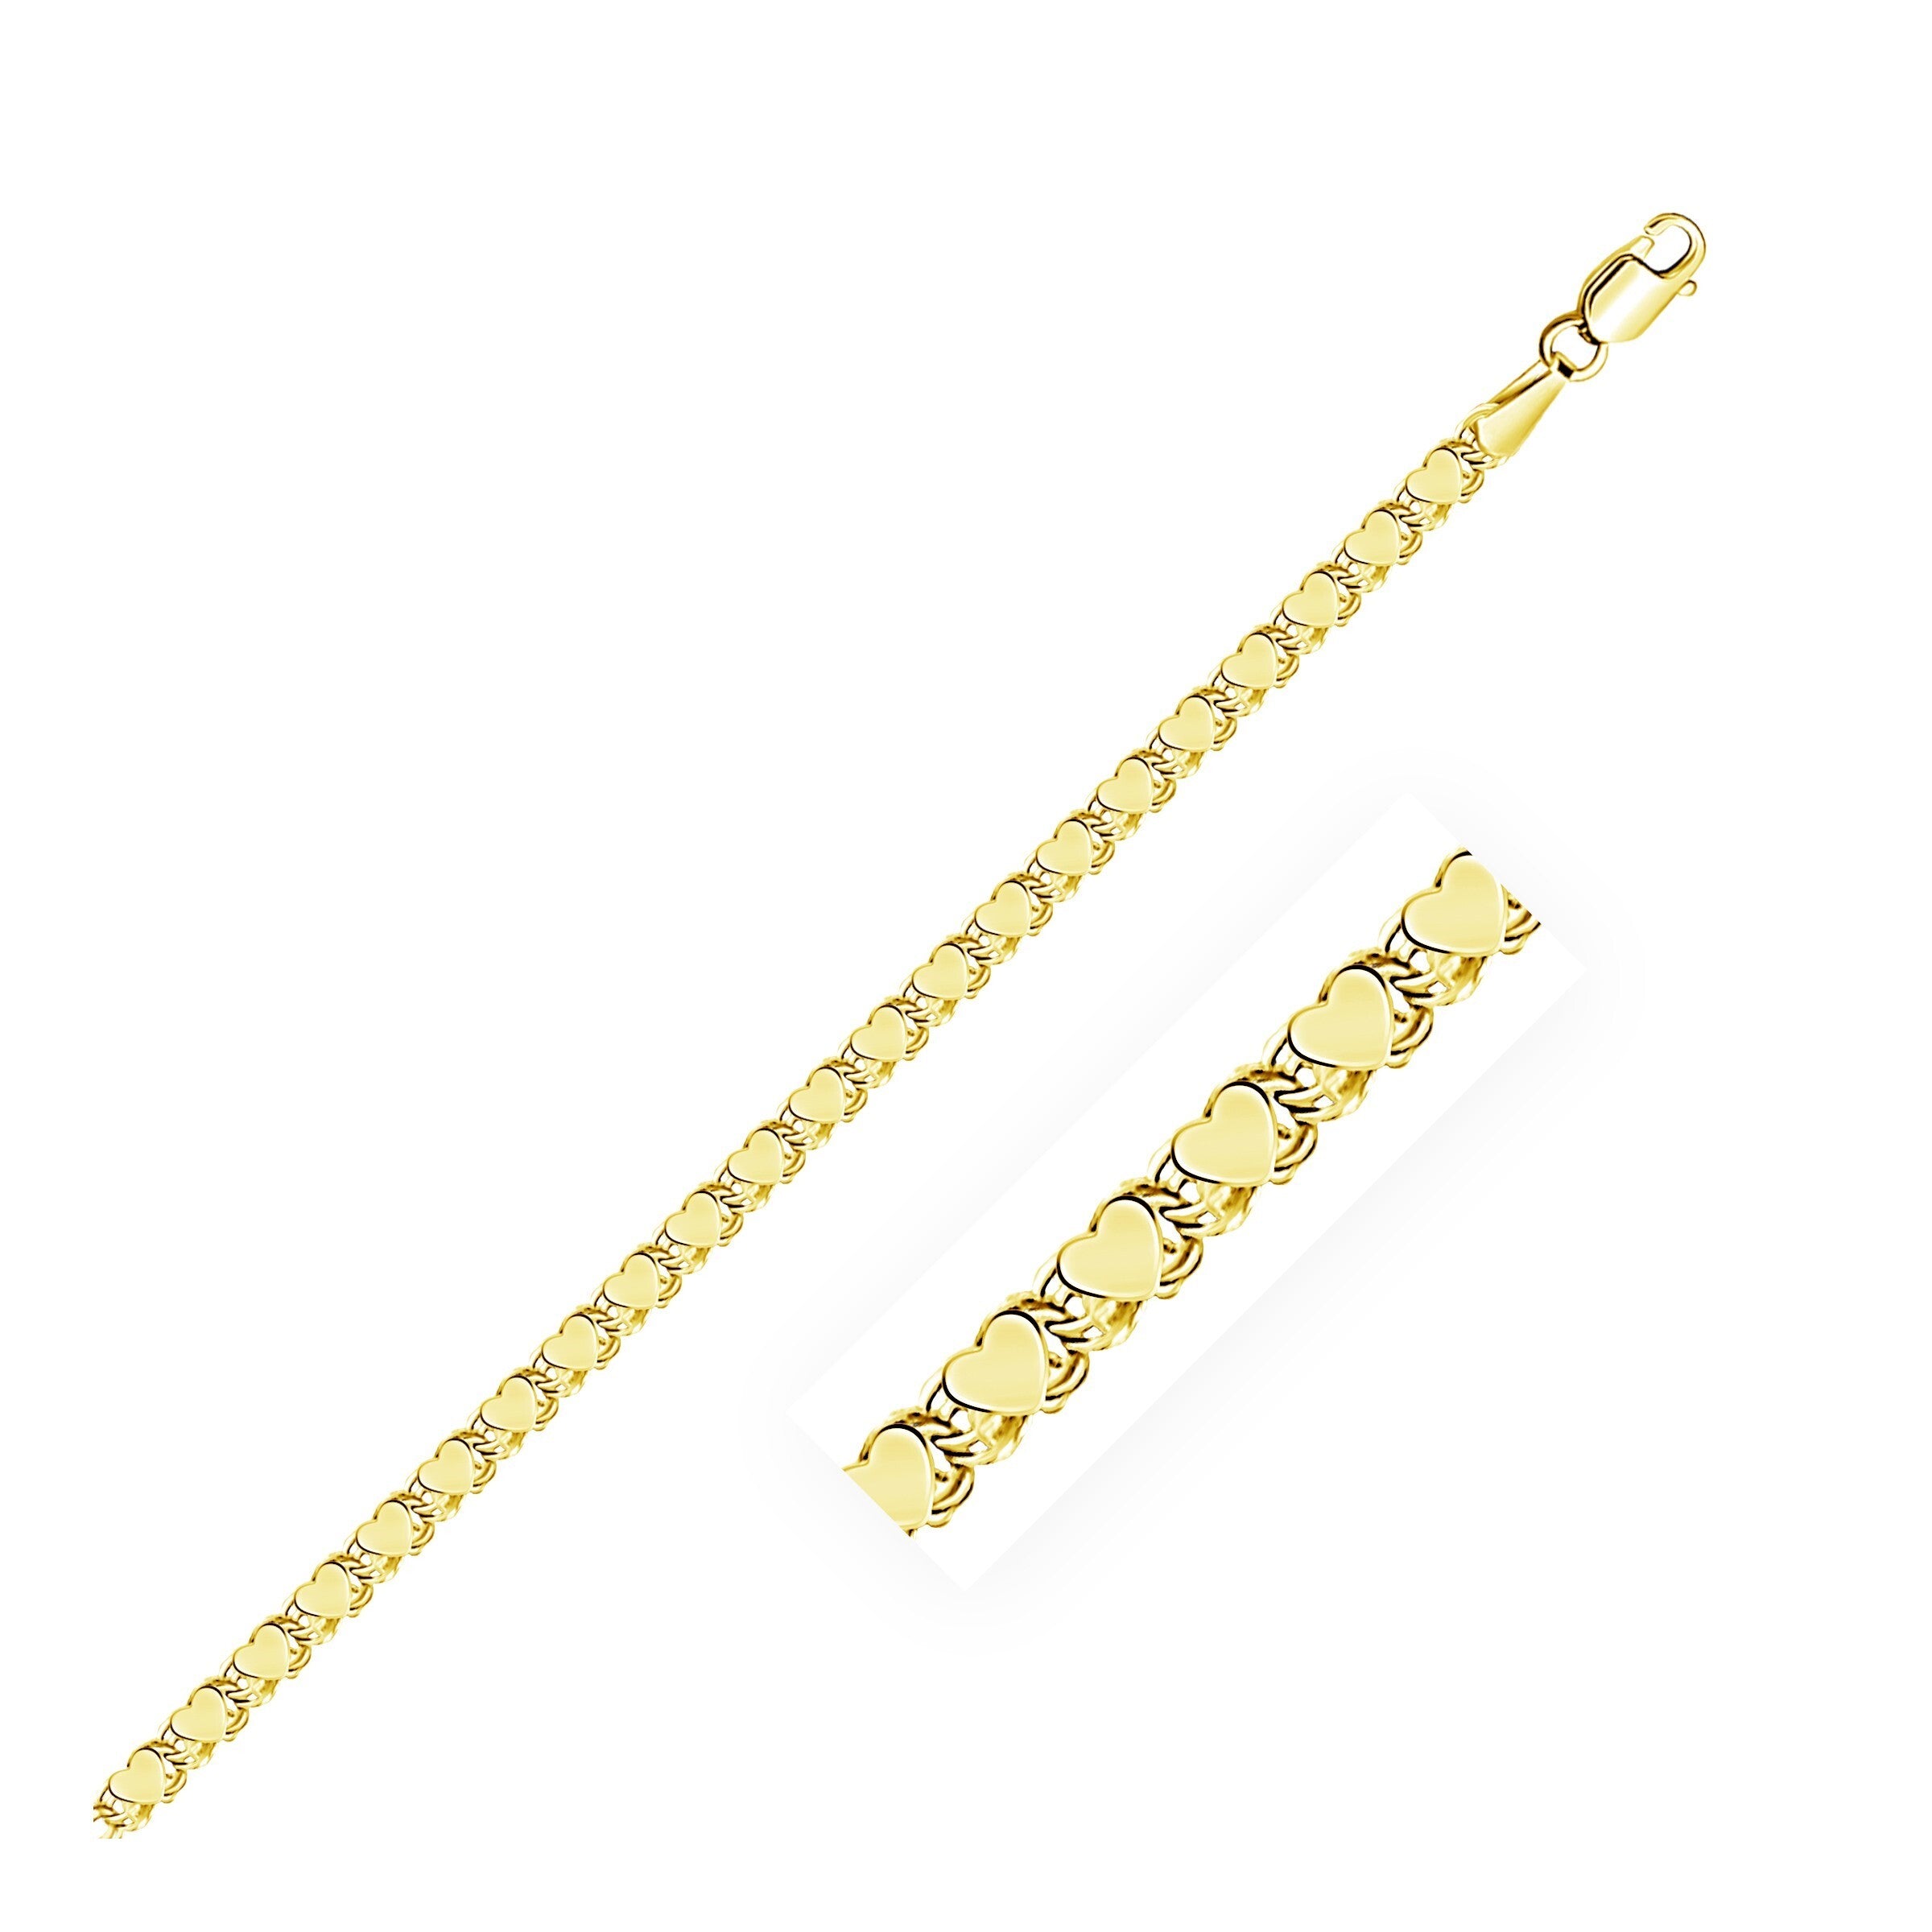 2.9mm 14k Yellow Gold Heart Anklet, size 10''